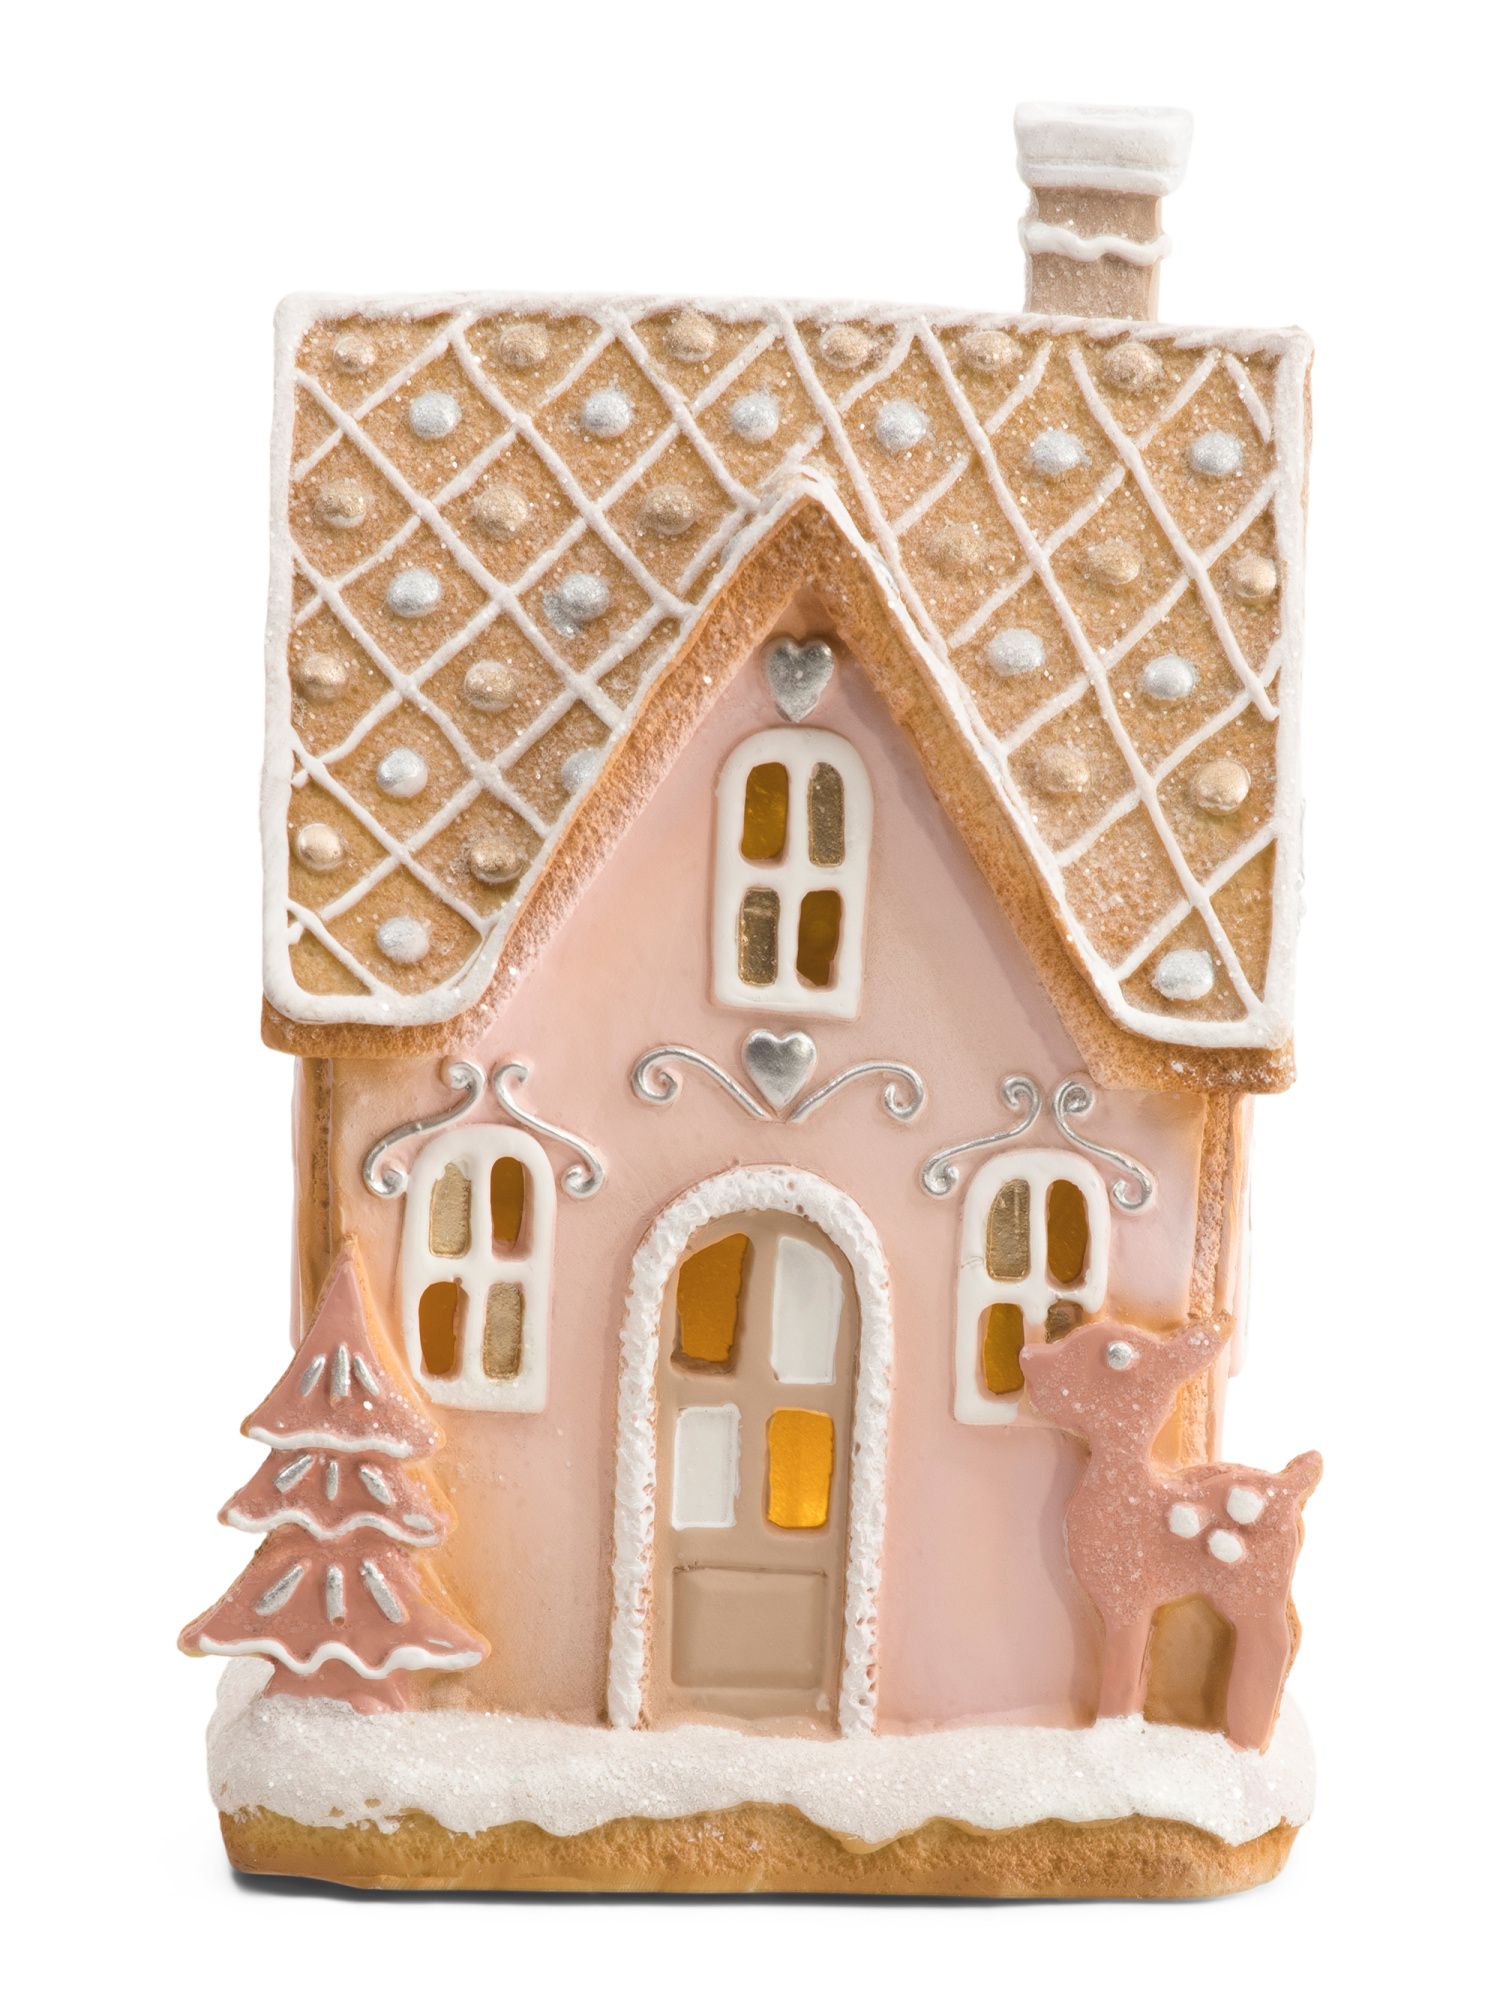 8.5in Led Resin Gingerbread House | TJ Maxx